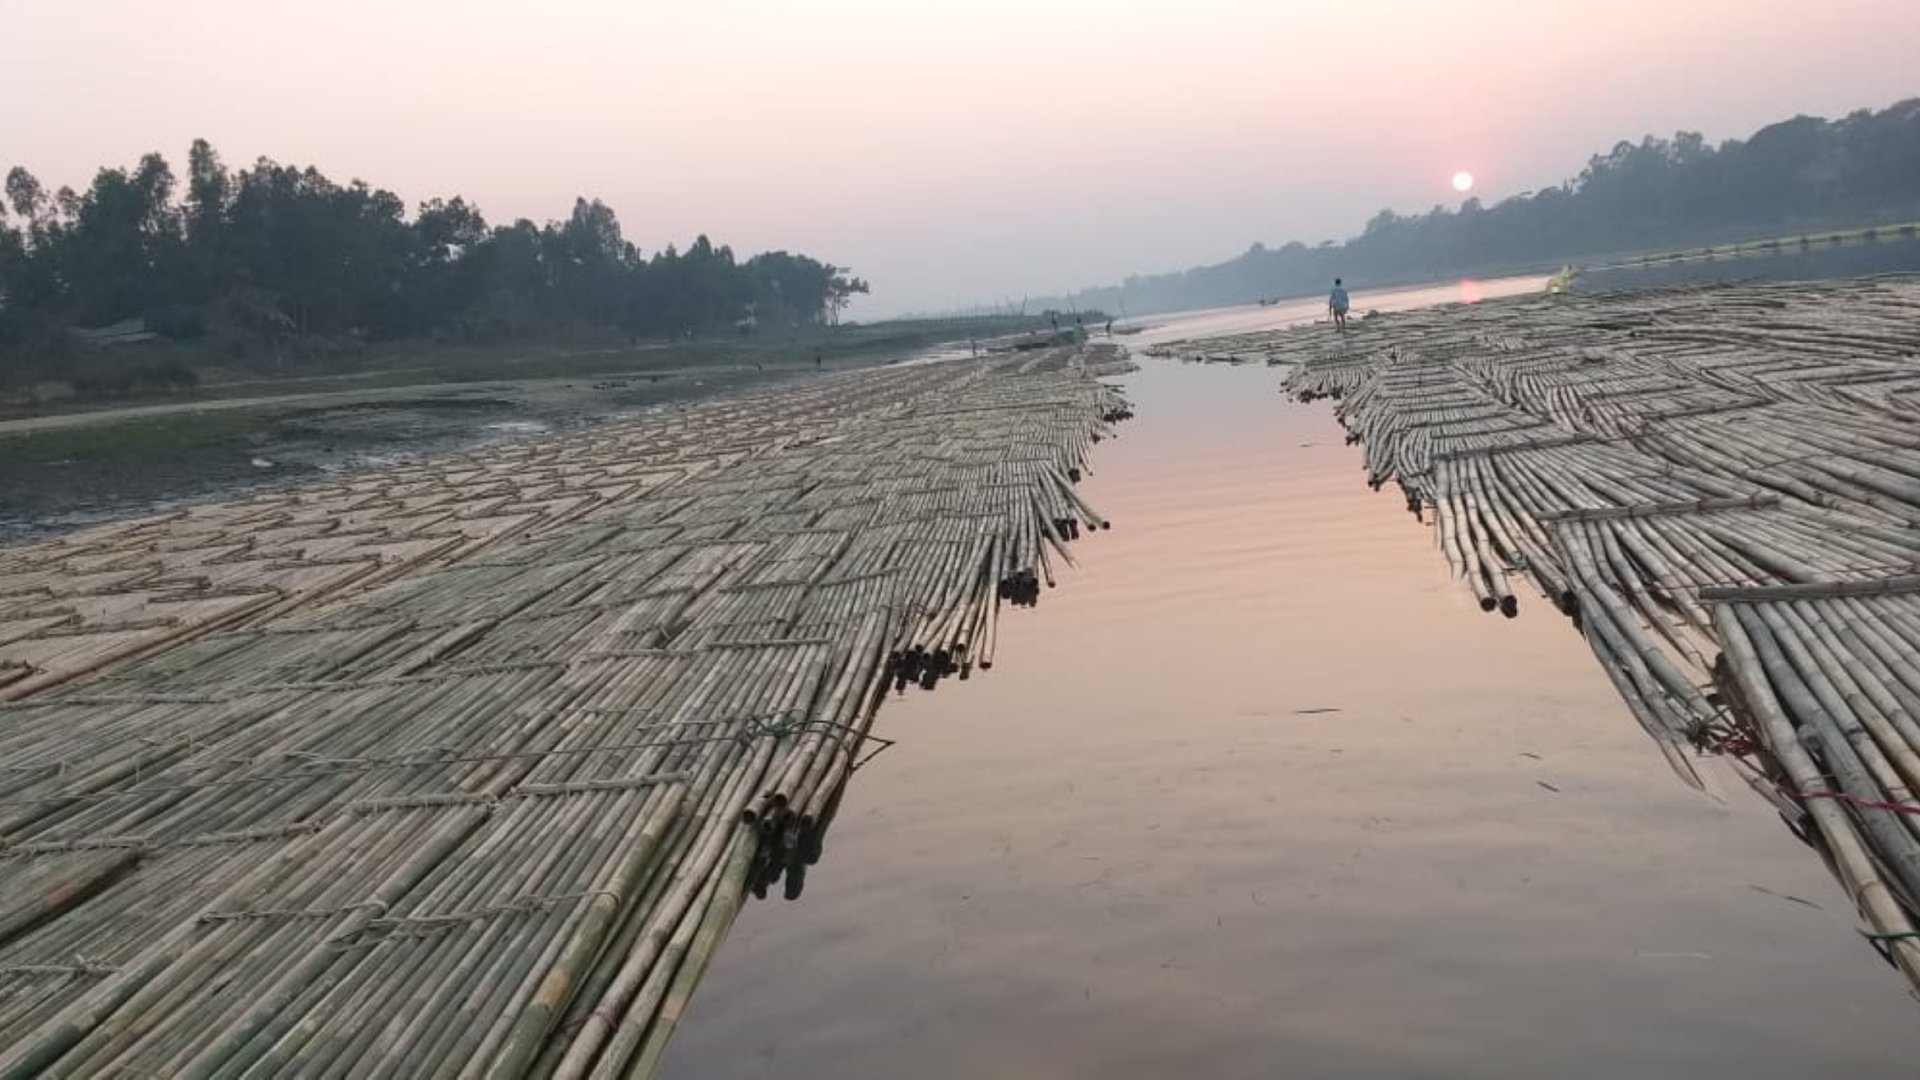 Bamboo on a river